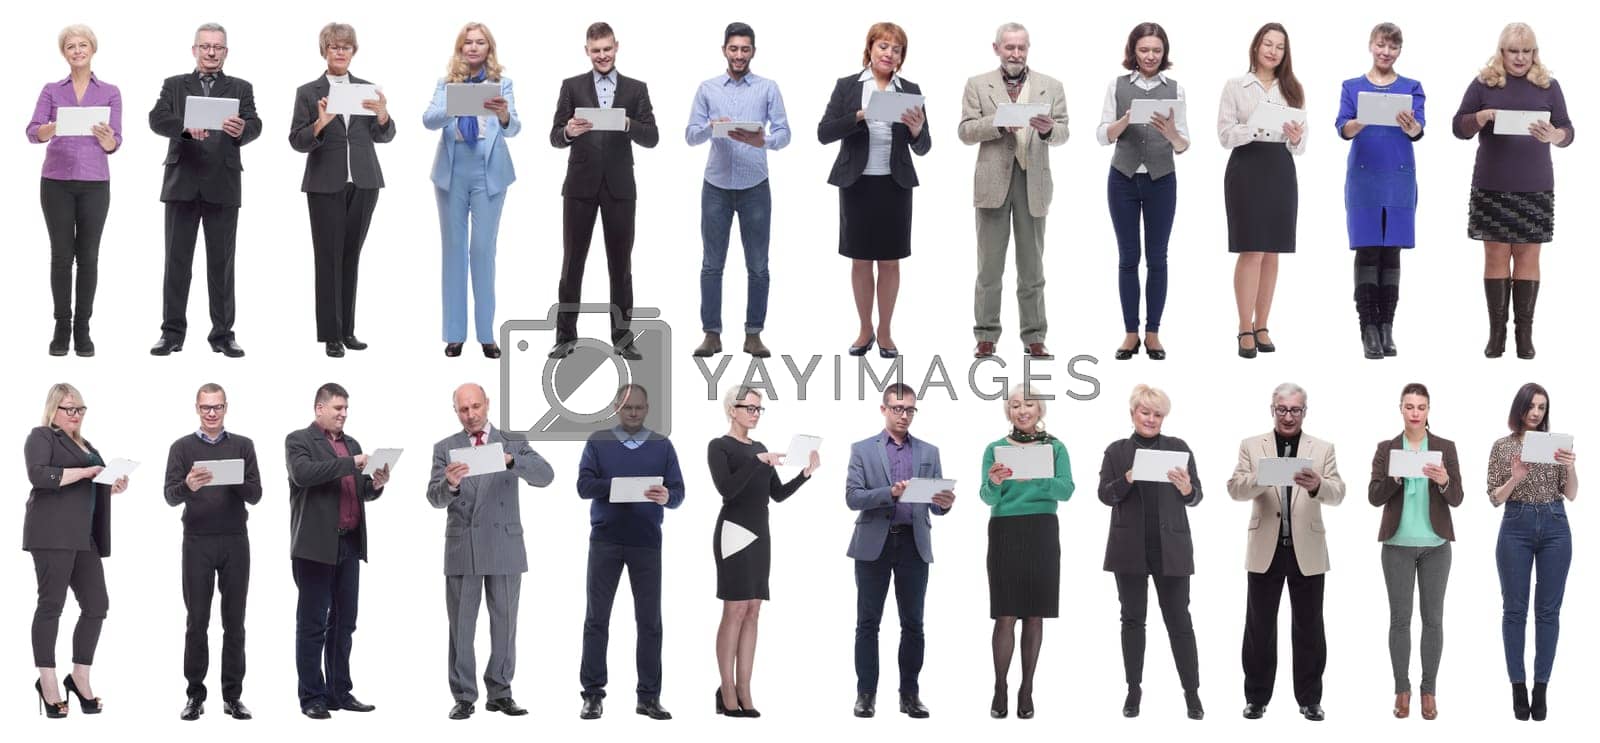 Royalty free image of group of people holding tablet and looking into it by asdf